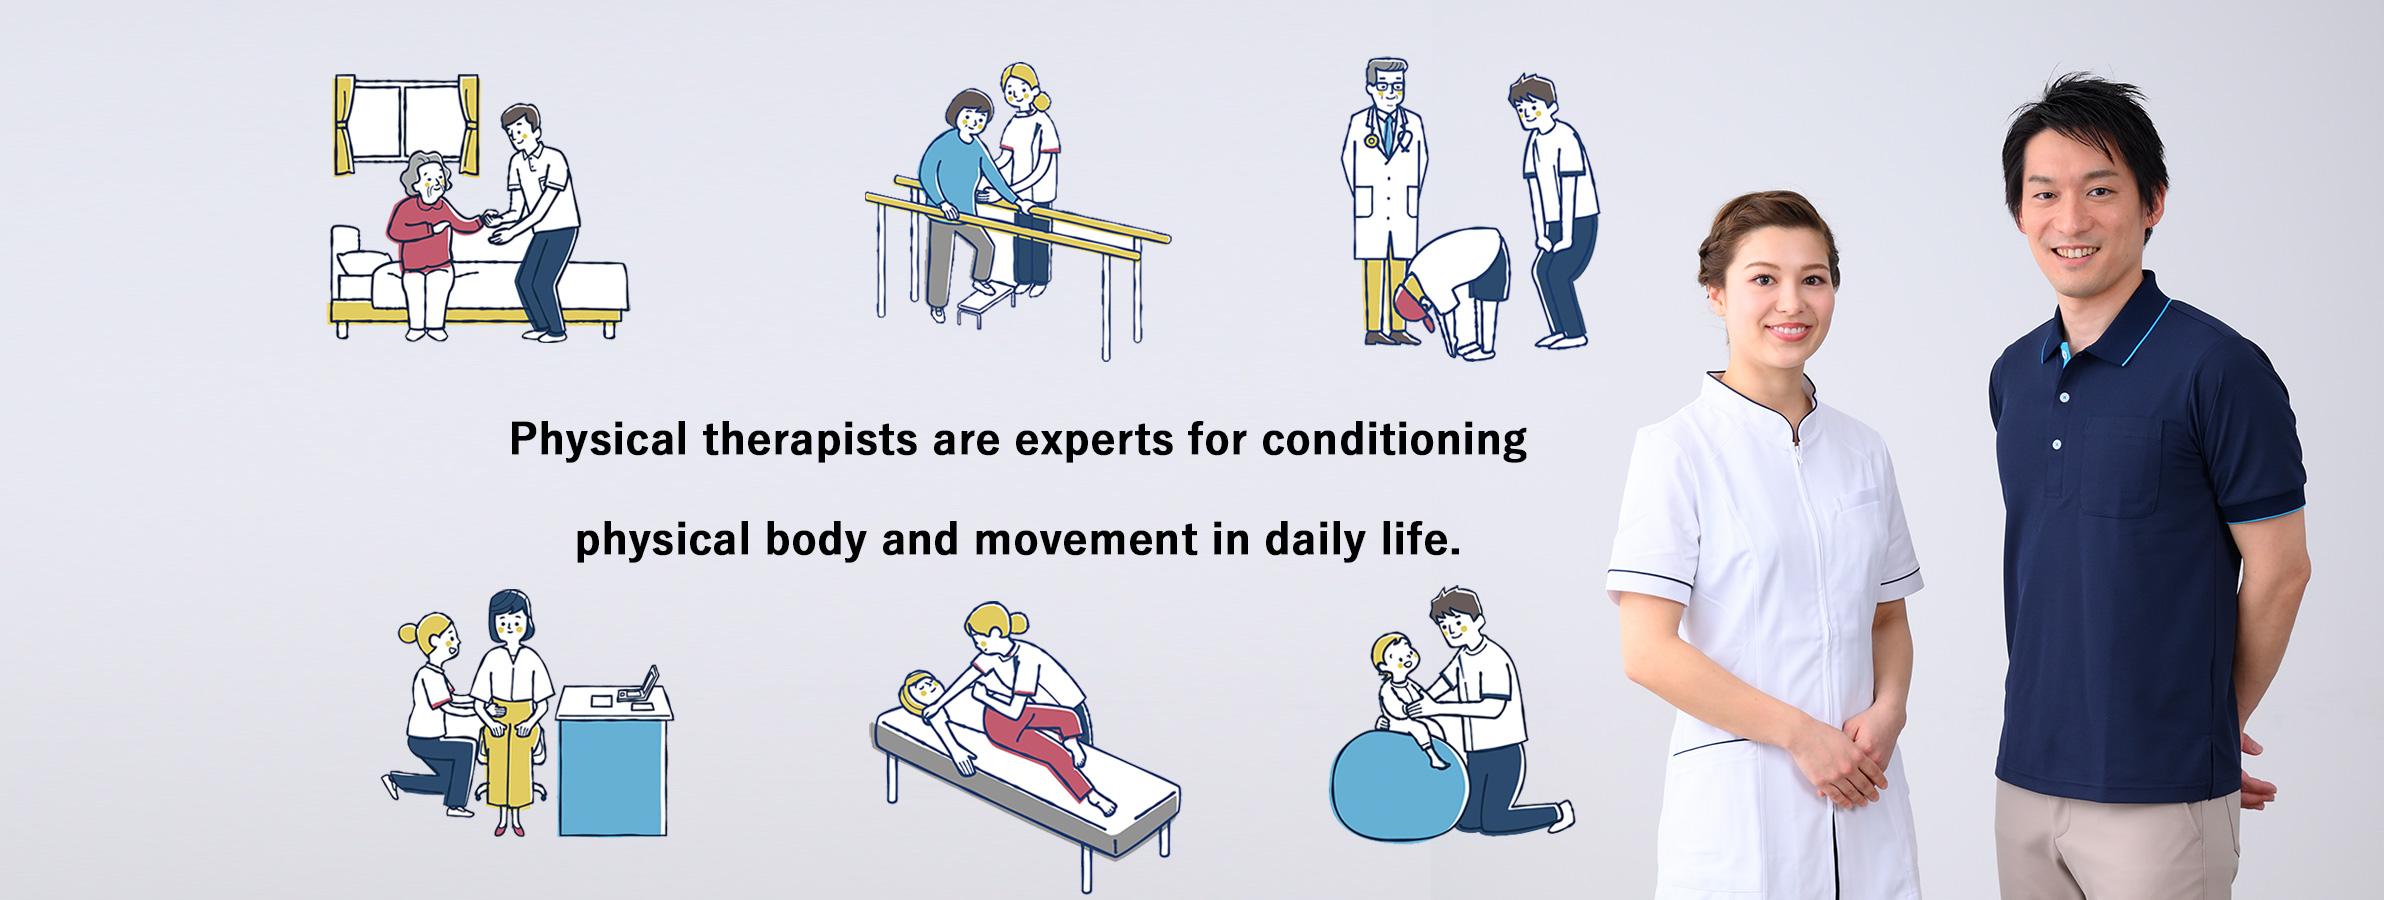 Supporting the aged society with long life expectancy through “Exercise therapy”